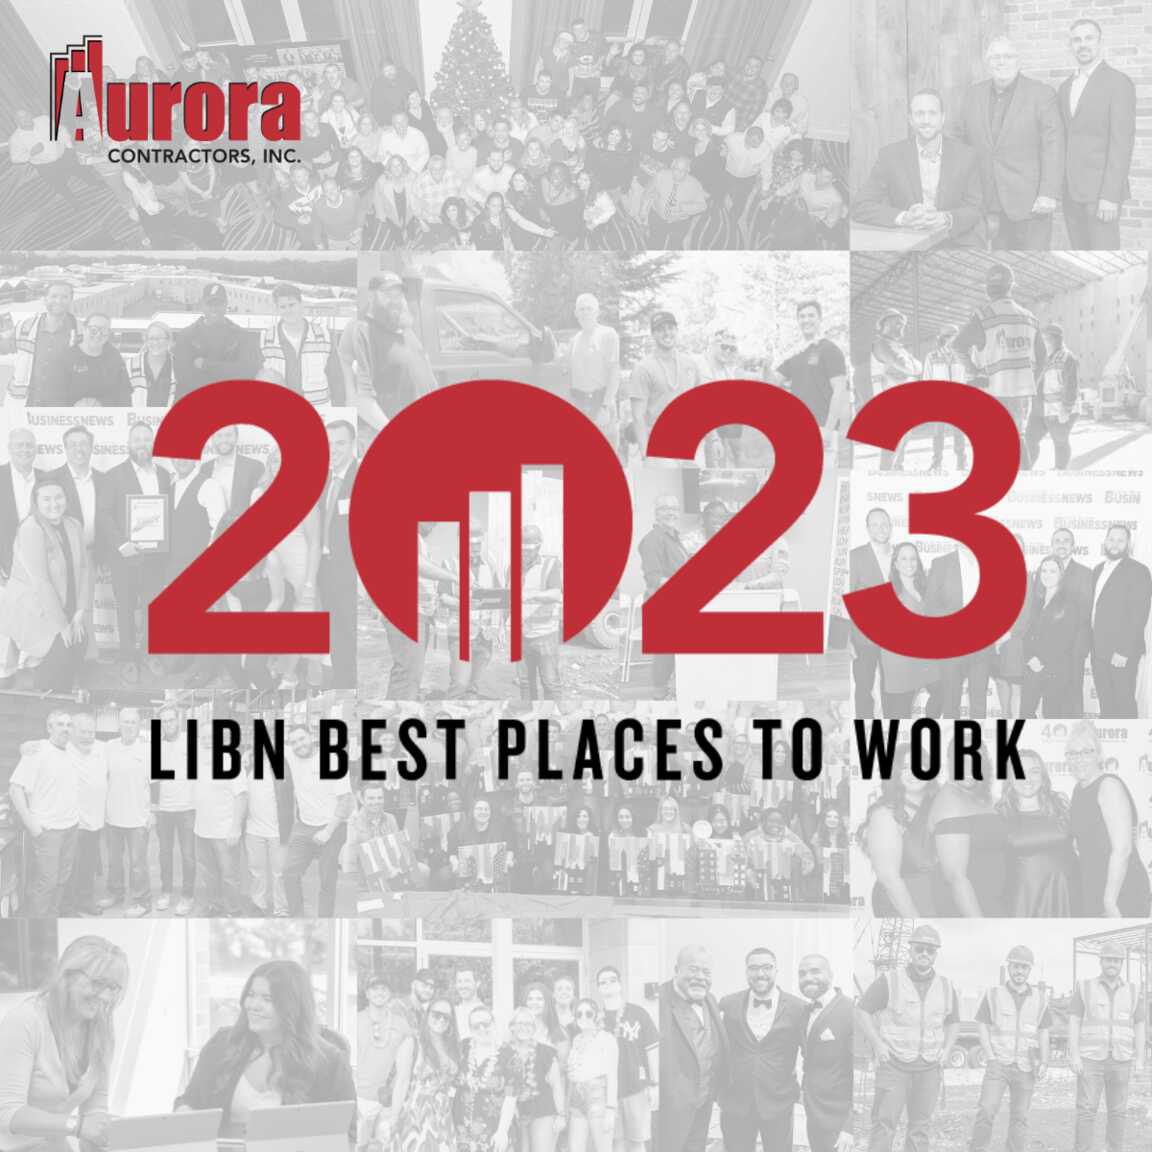 Aurora Selected As One Of The Best Places To Work on LI!